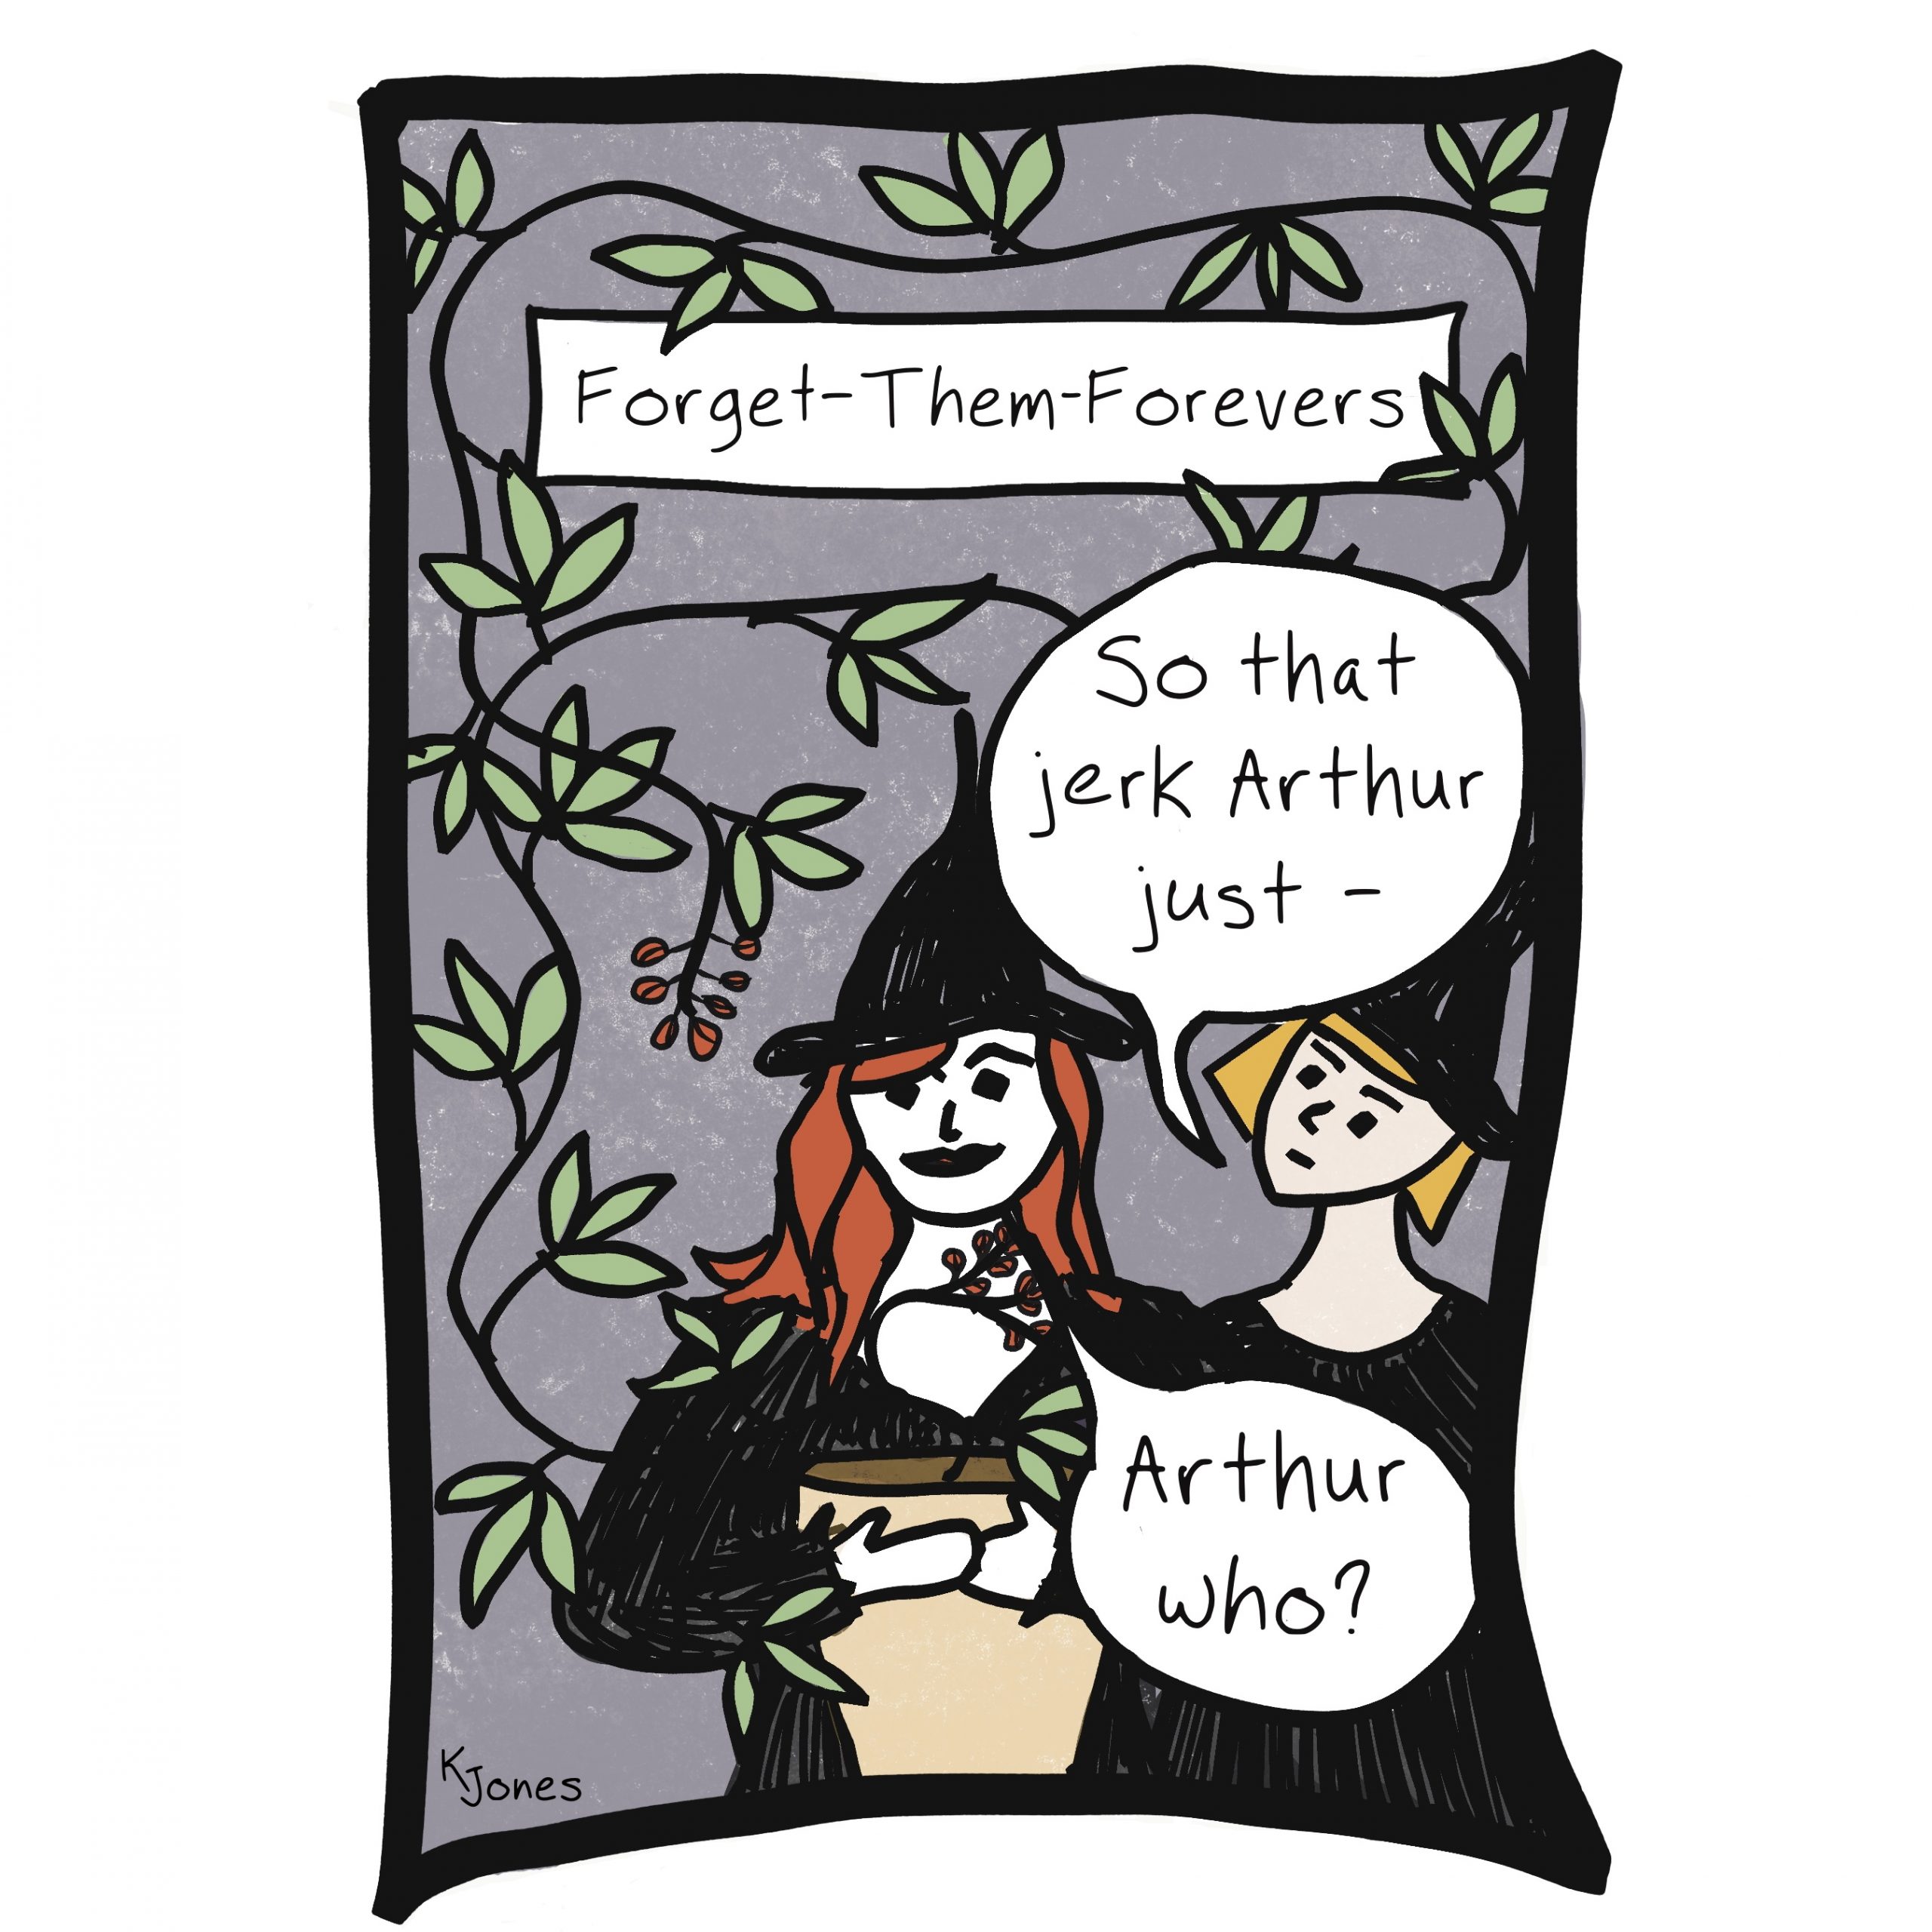 A bold line cartoon illustration of a magical seed packet labeled Forget-Them-Forevers, with two young witches having a conversation. A red-haired witch with stark white skin holds a potted vine that's blooming. A blonde witch with light brown skin looks at her in concern. Blonde witch: So that jerk Arthur just -- Red-haired witch: Arthur who? (Created by Kelly Jones (curiosityjones) as part of Drawtober 2022, Garden of Magick prompt.)